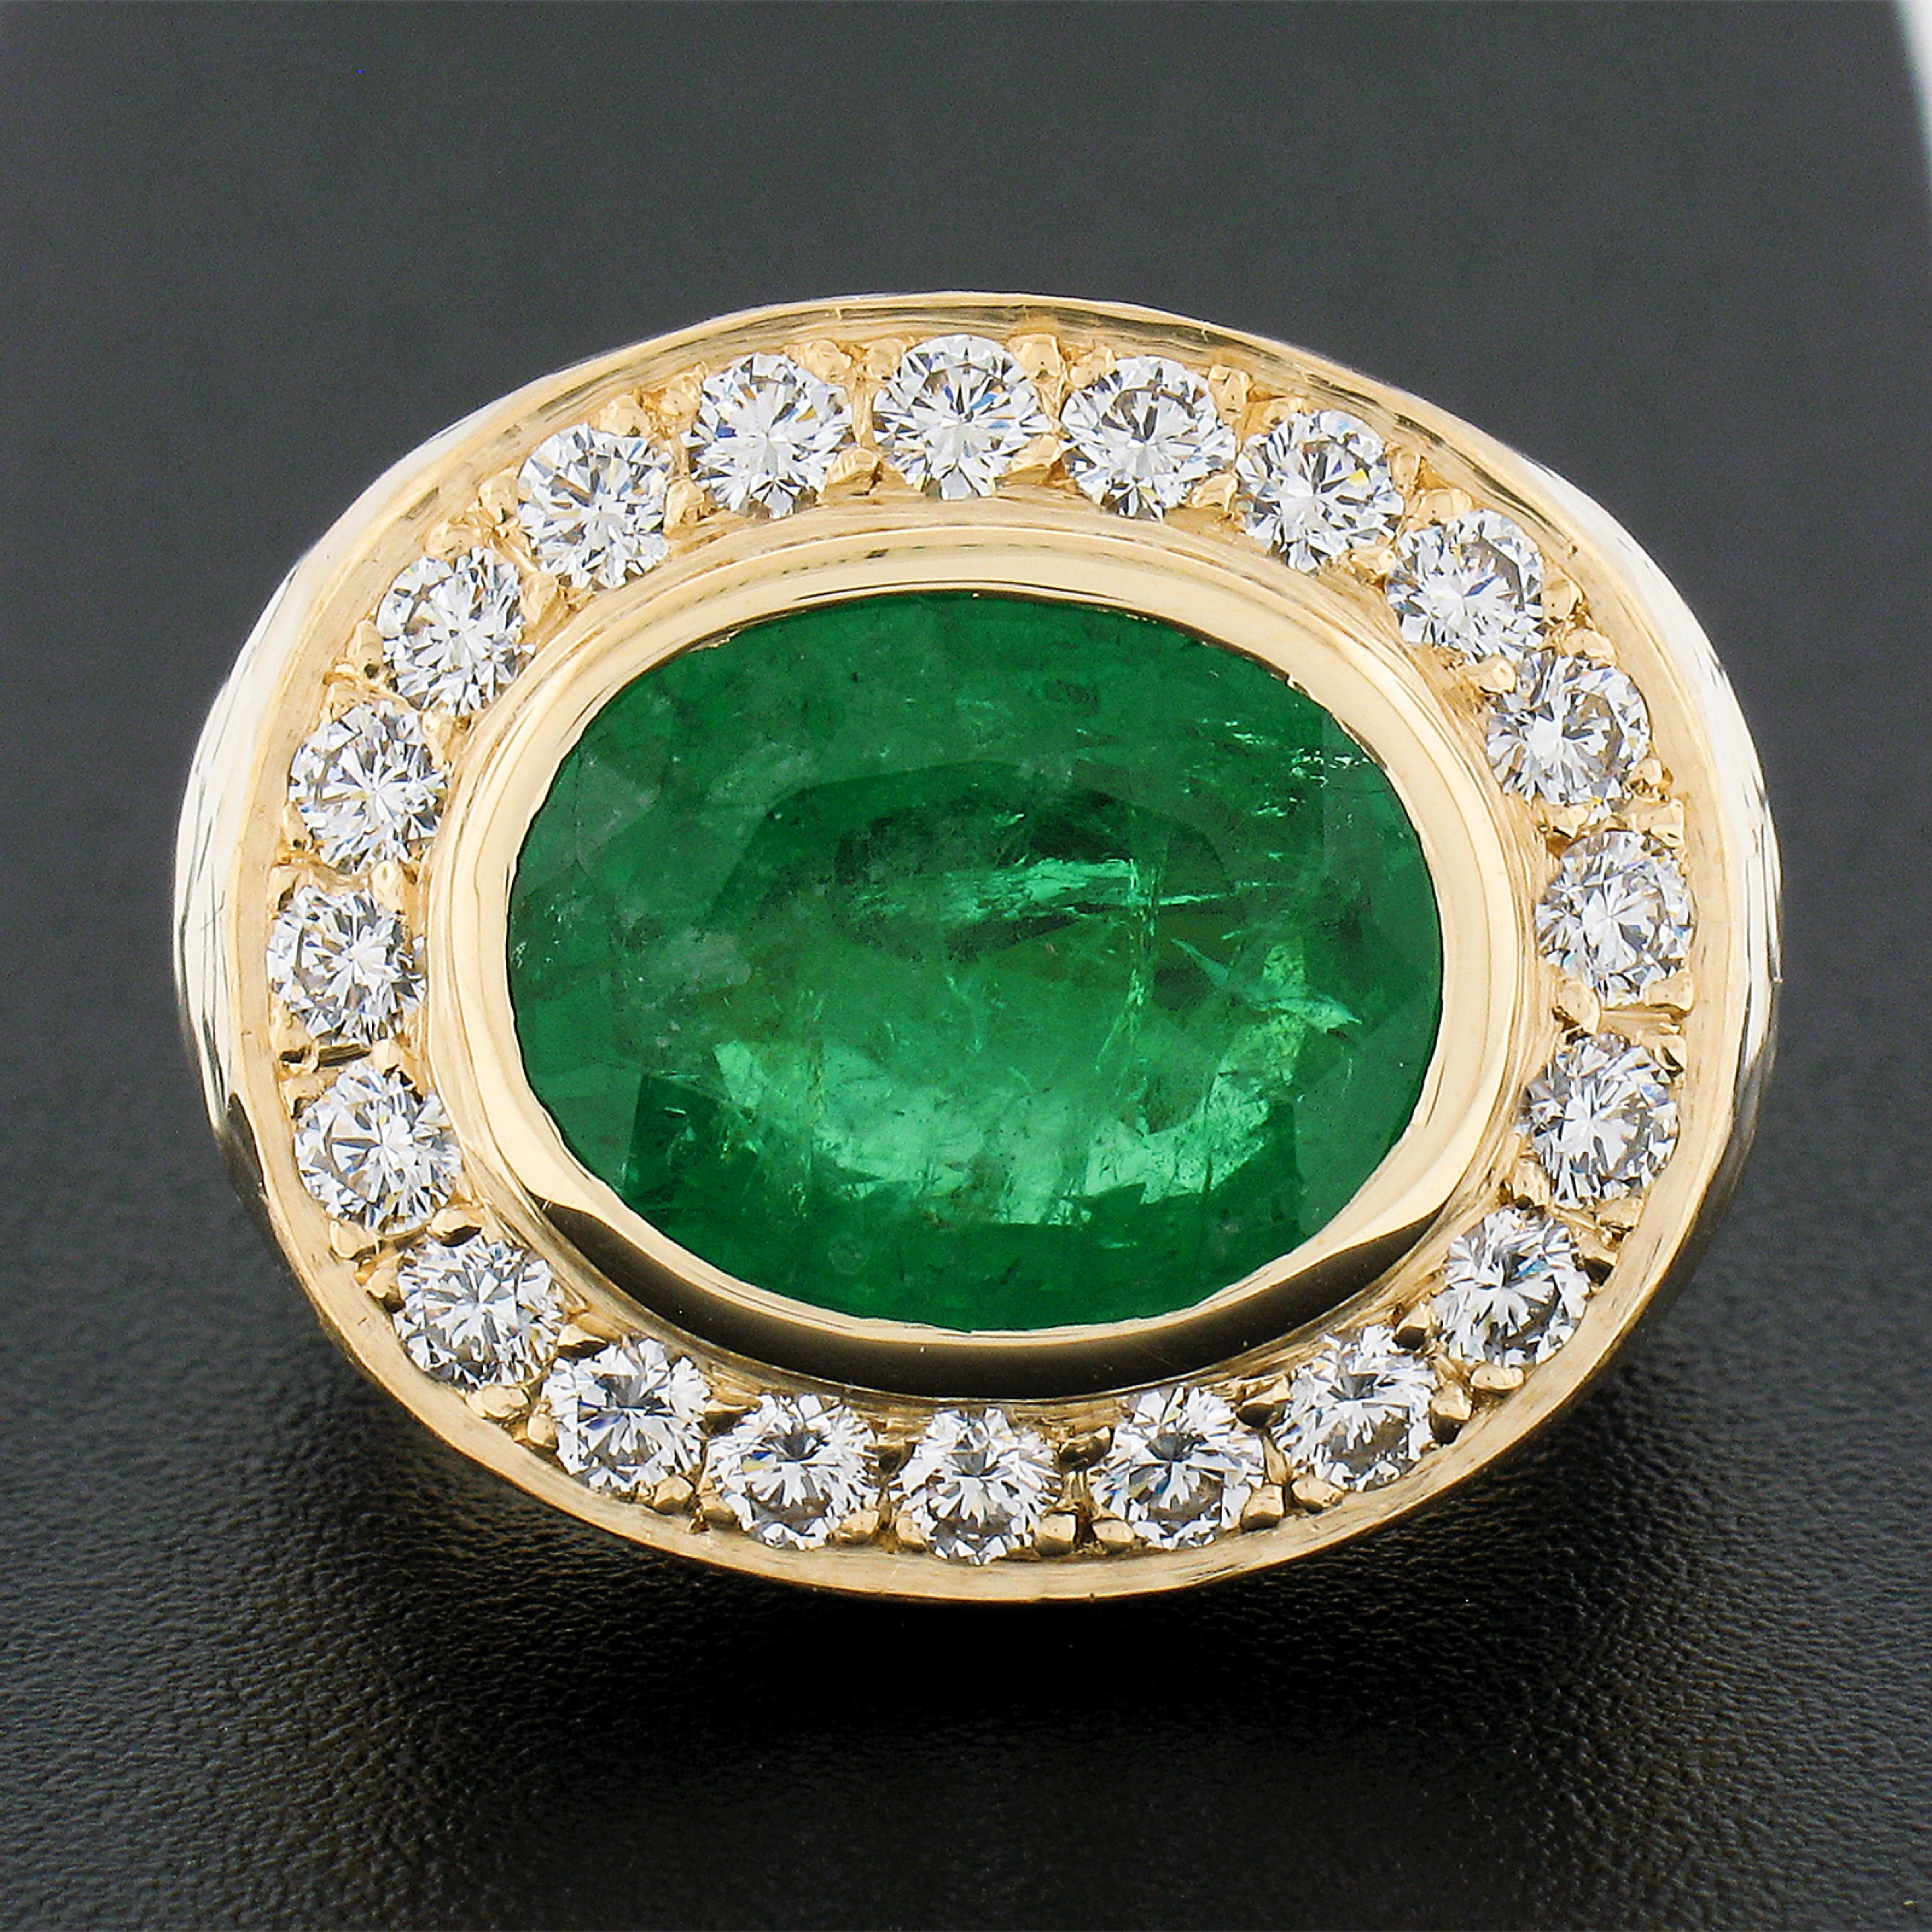 You are looking at a truly breathtaking, GIA certified, genuine emerald and diamond cocktail ring that is brand new and very well crafted in solid 18k greenish yellow gold. It features a large oval cut emerald solitaire neatly bezel set at the